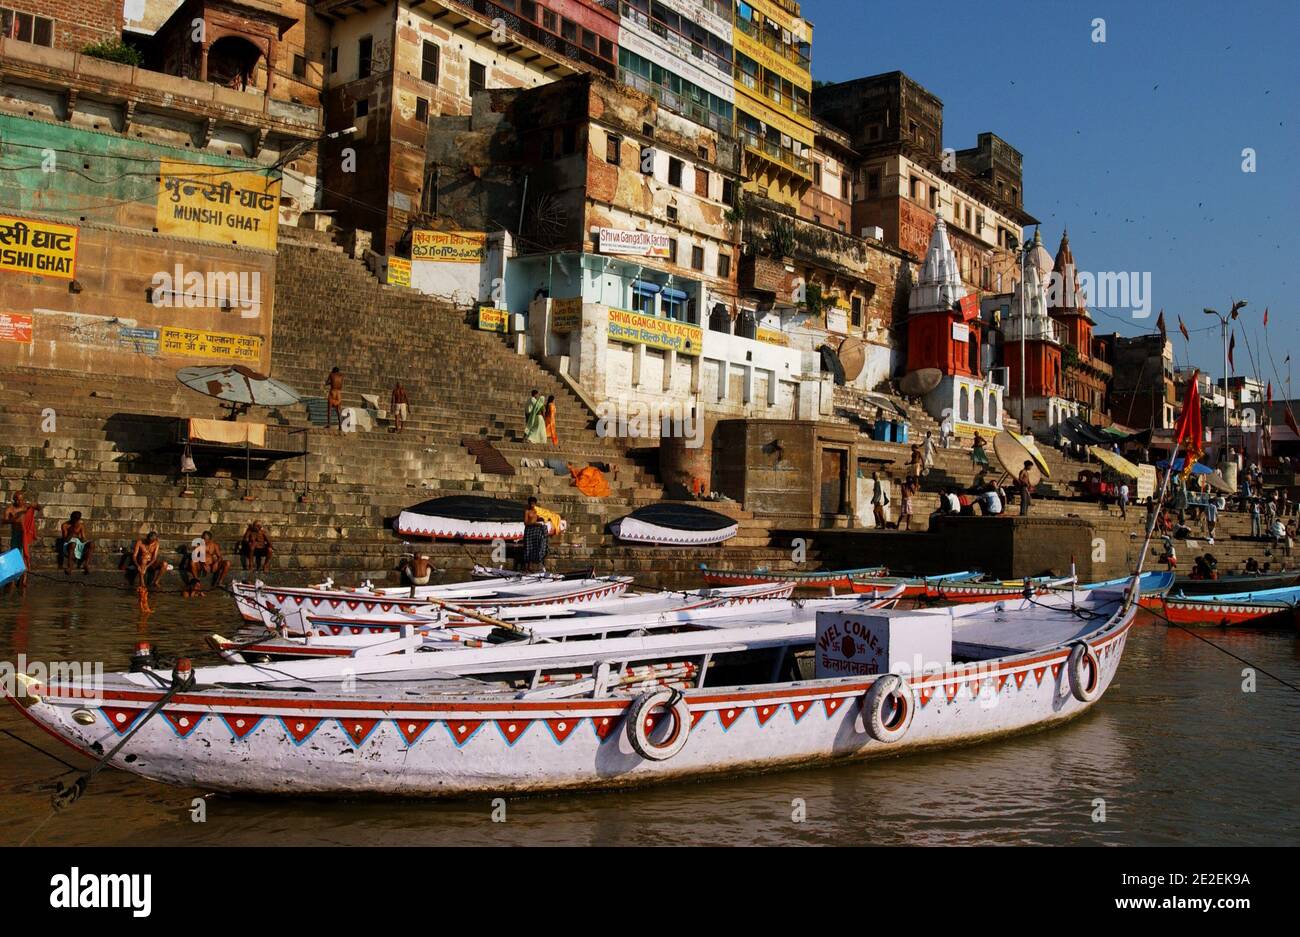 The oldest living city in the world, known as Varanasi, pictures above all  the ritual of death in India's culture. According to the tenets of  Hindouism, one who is graced to die